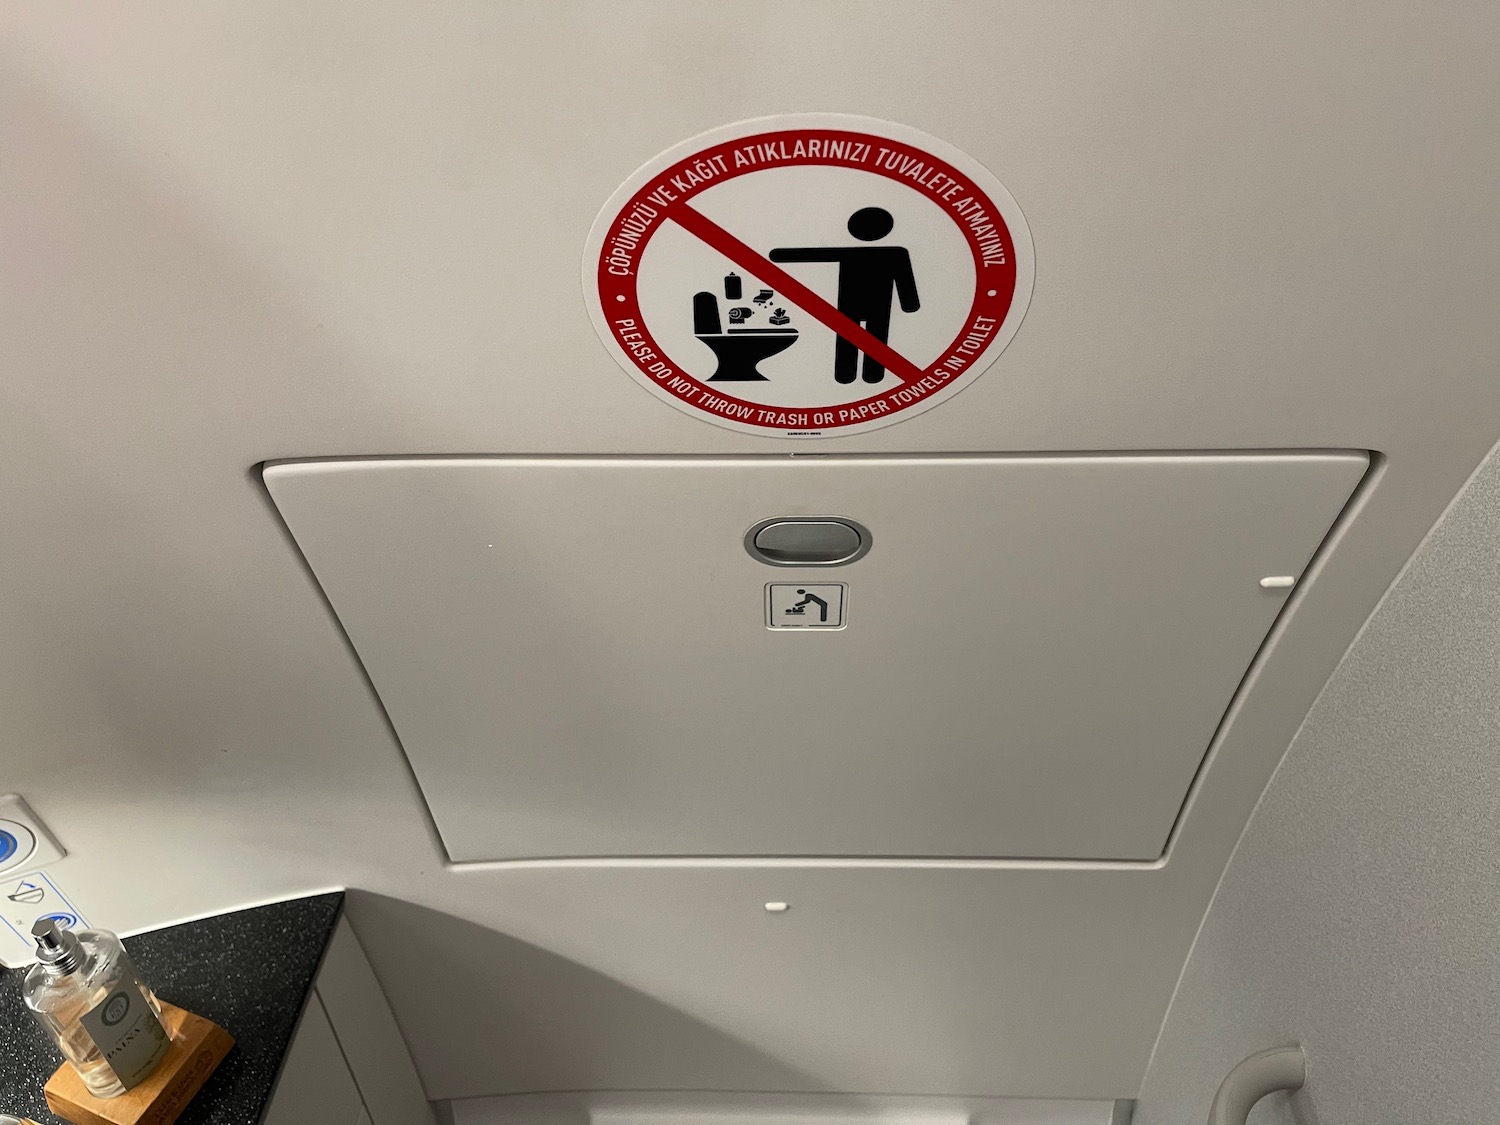 a sign on the ceiling of a plane